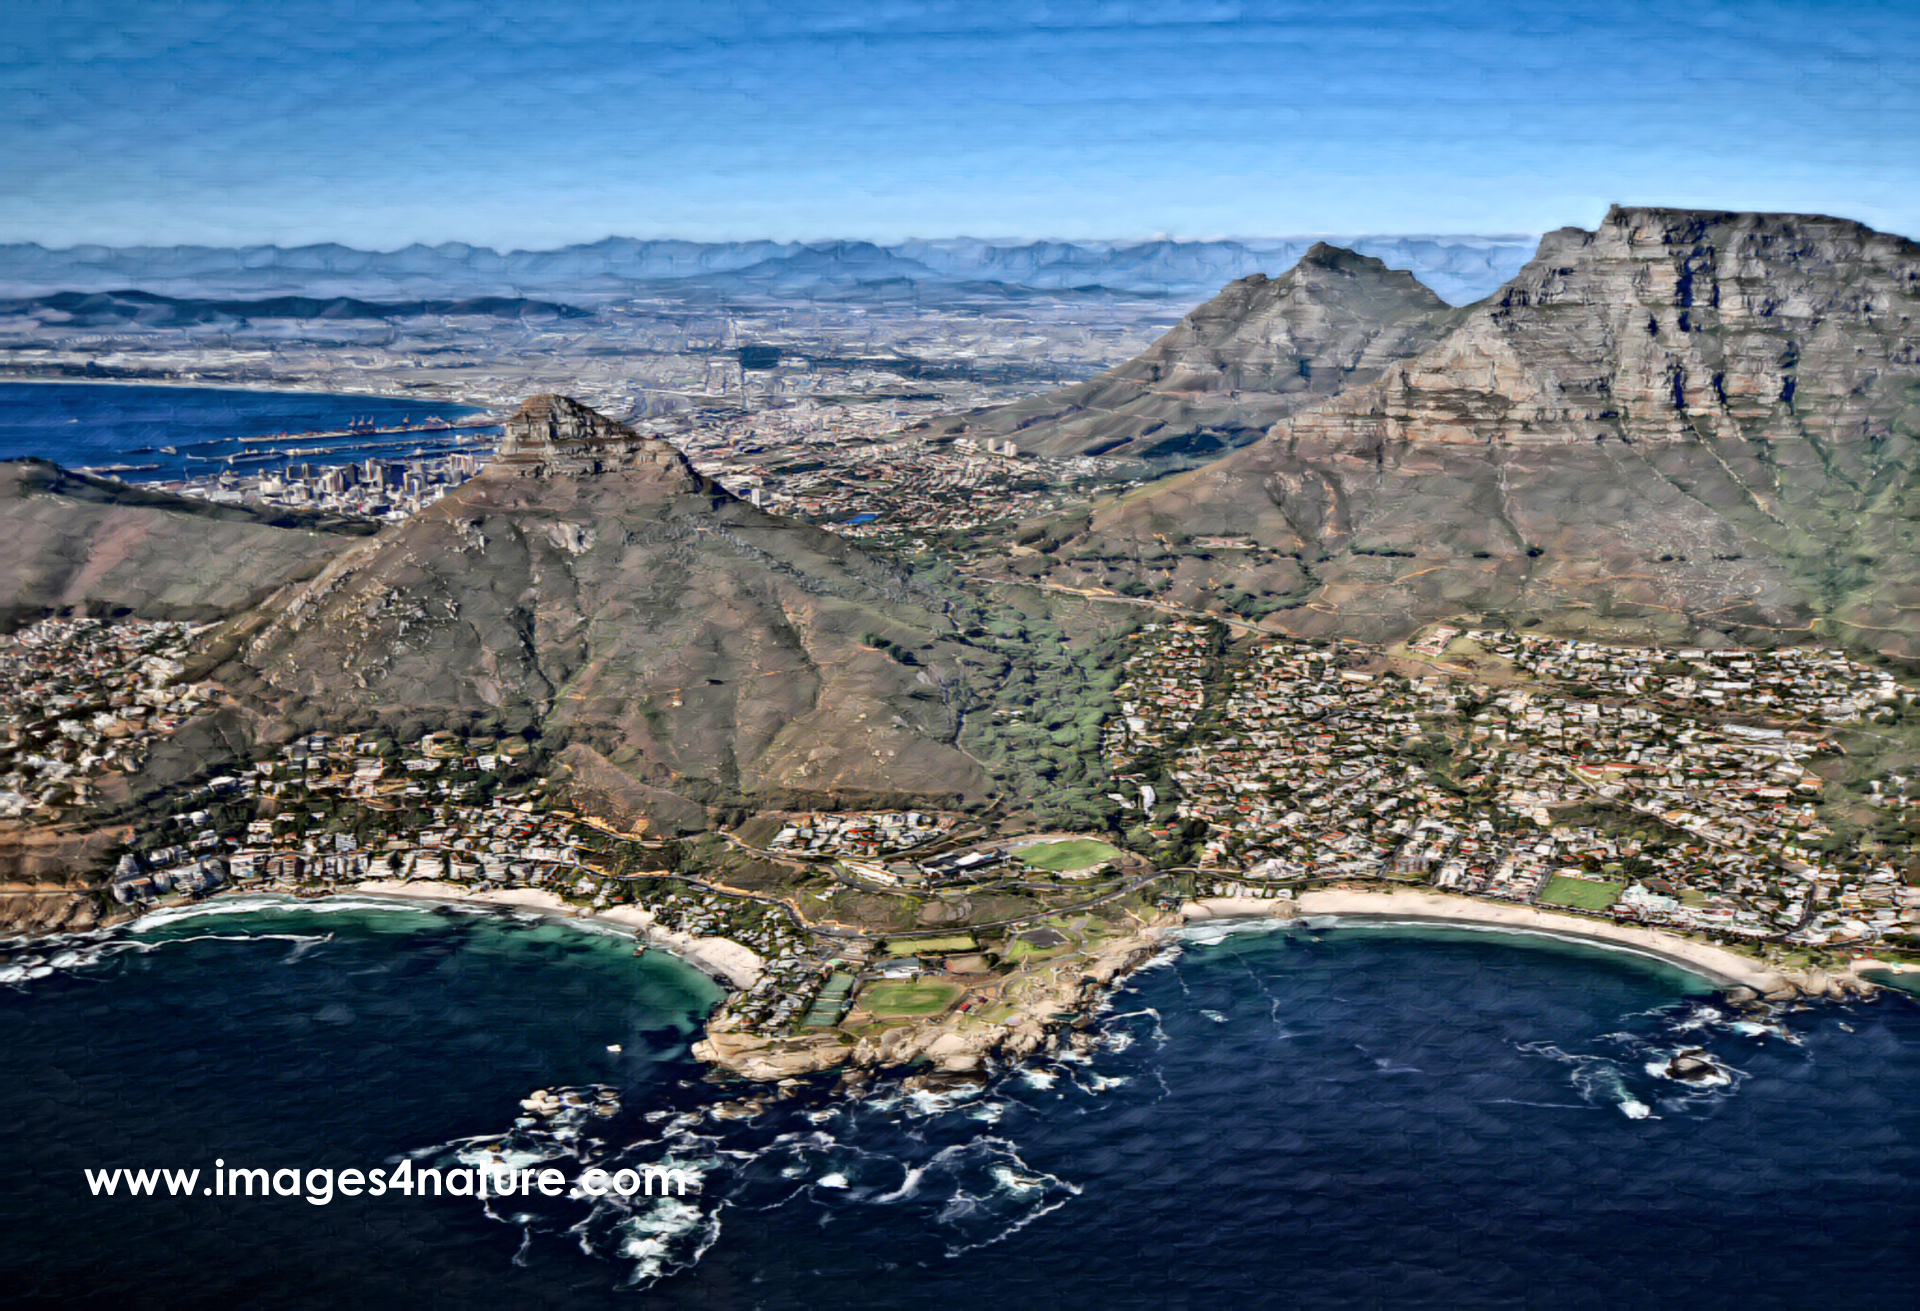 Scenic aerial view of Cape Town mountains, bays and city